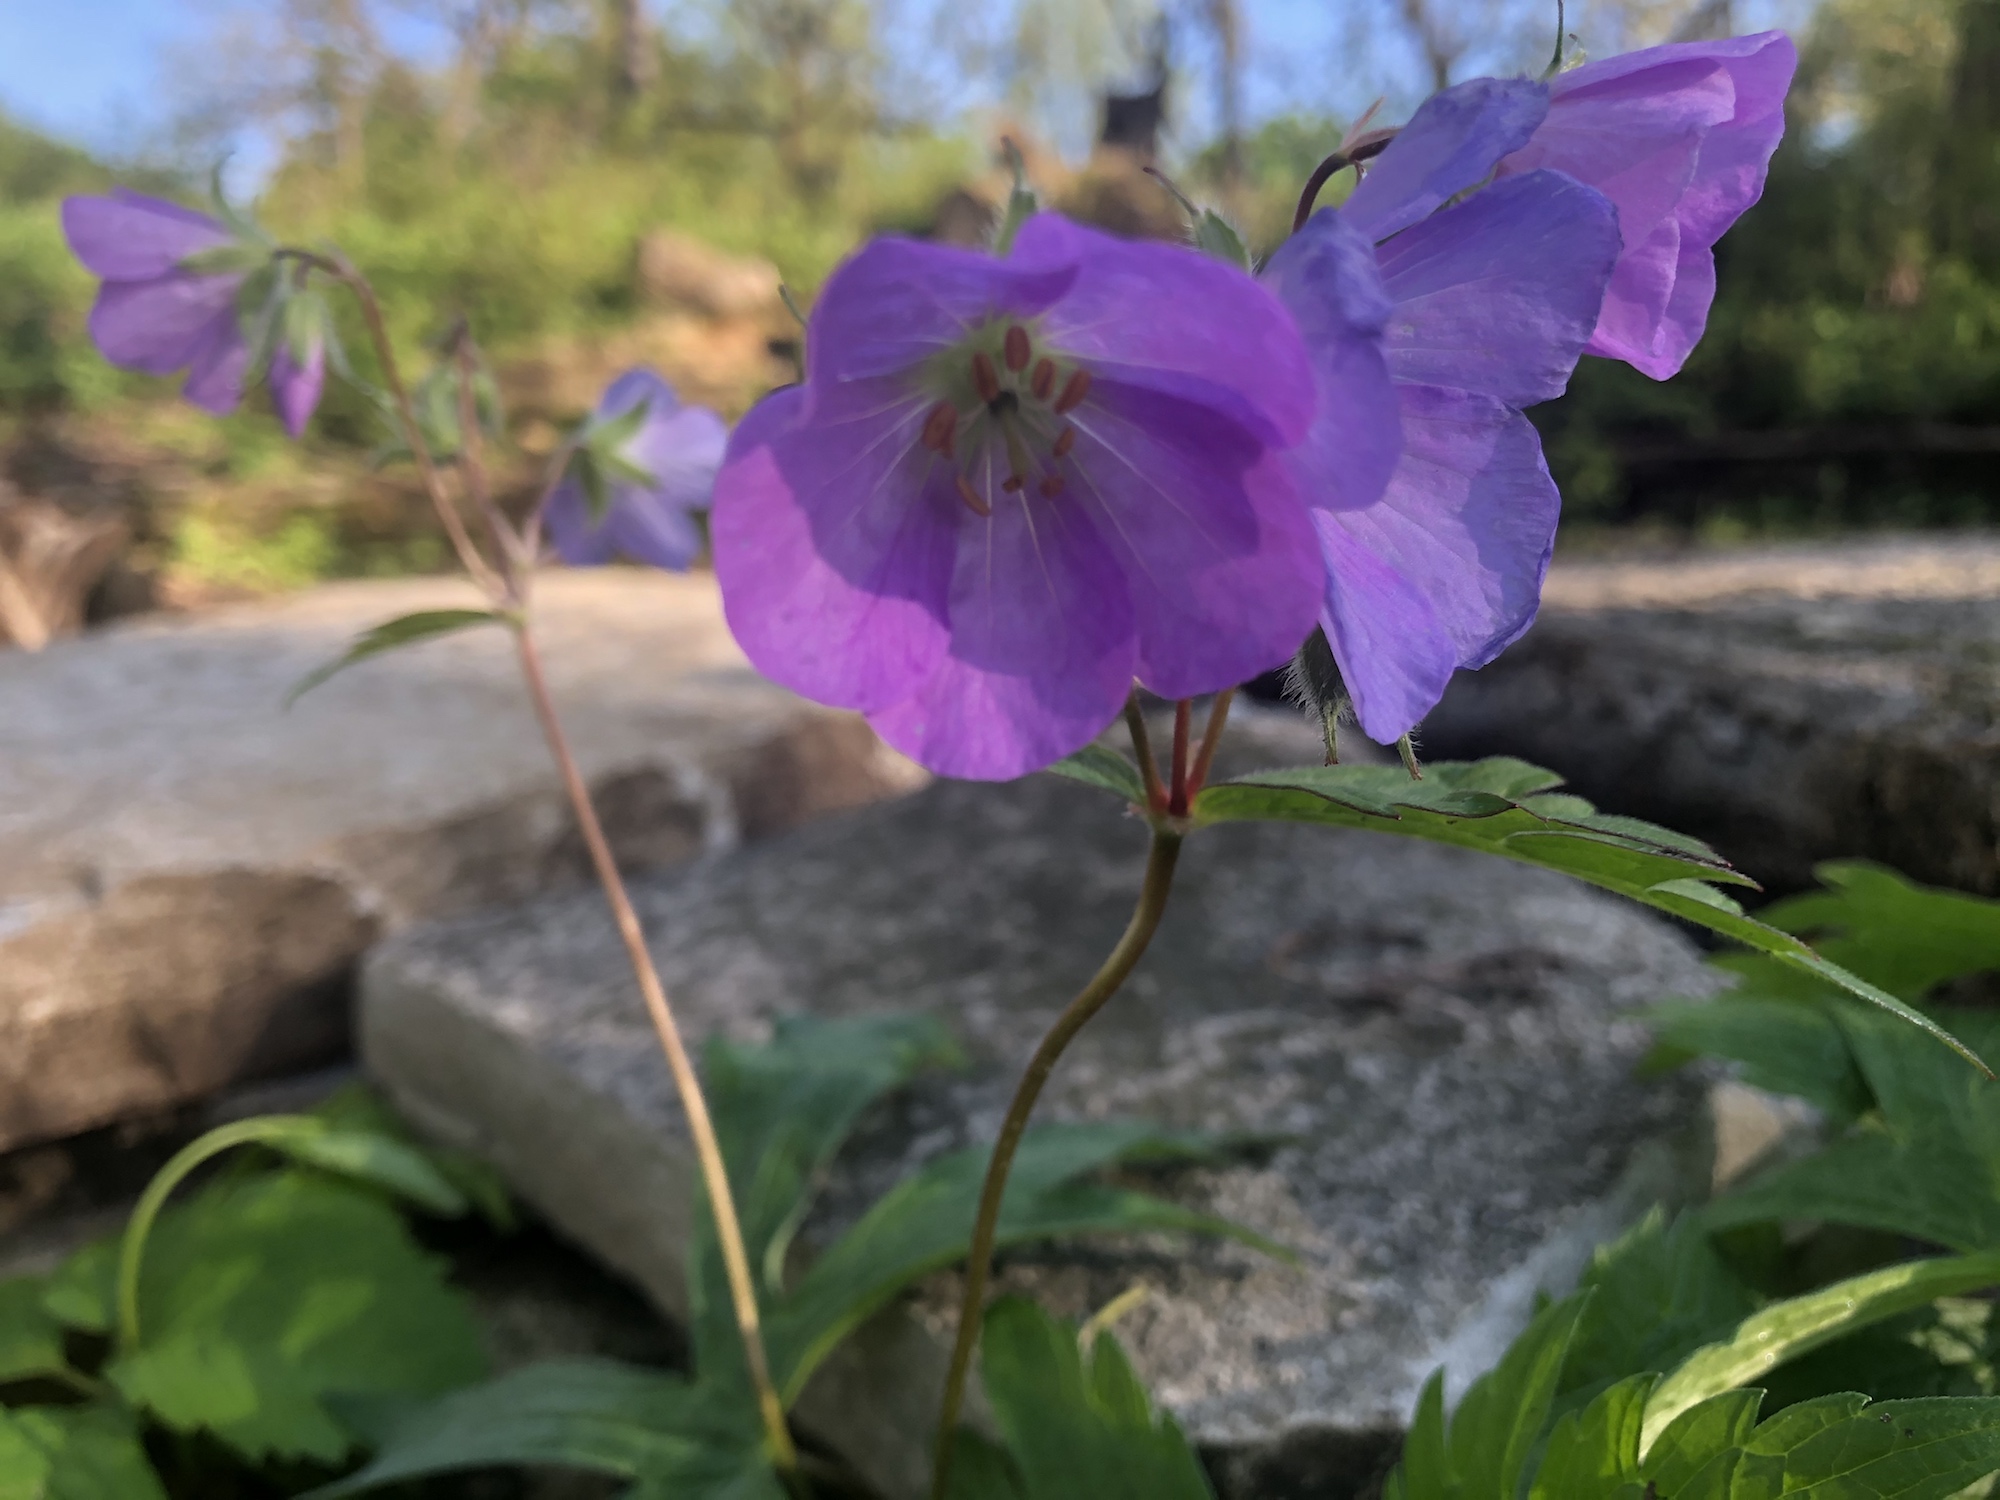 Wild Geranium by Council Ring in Oak Savanna on May 20, 2020.